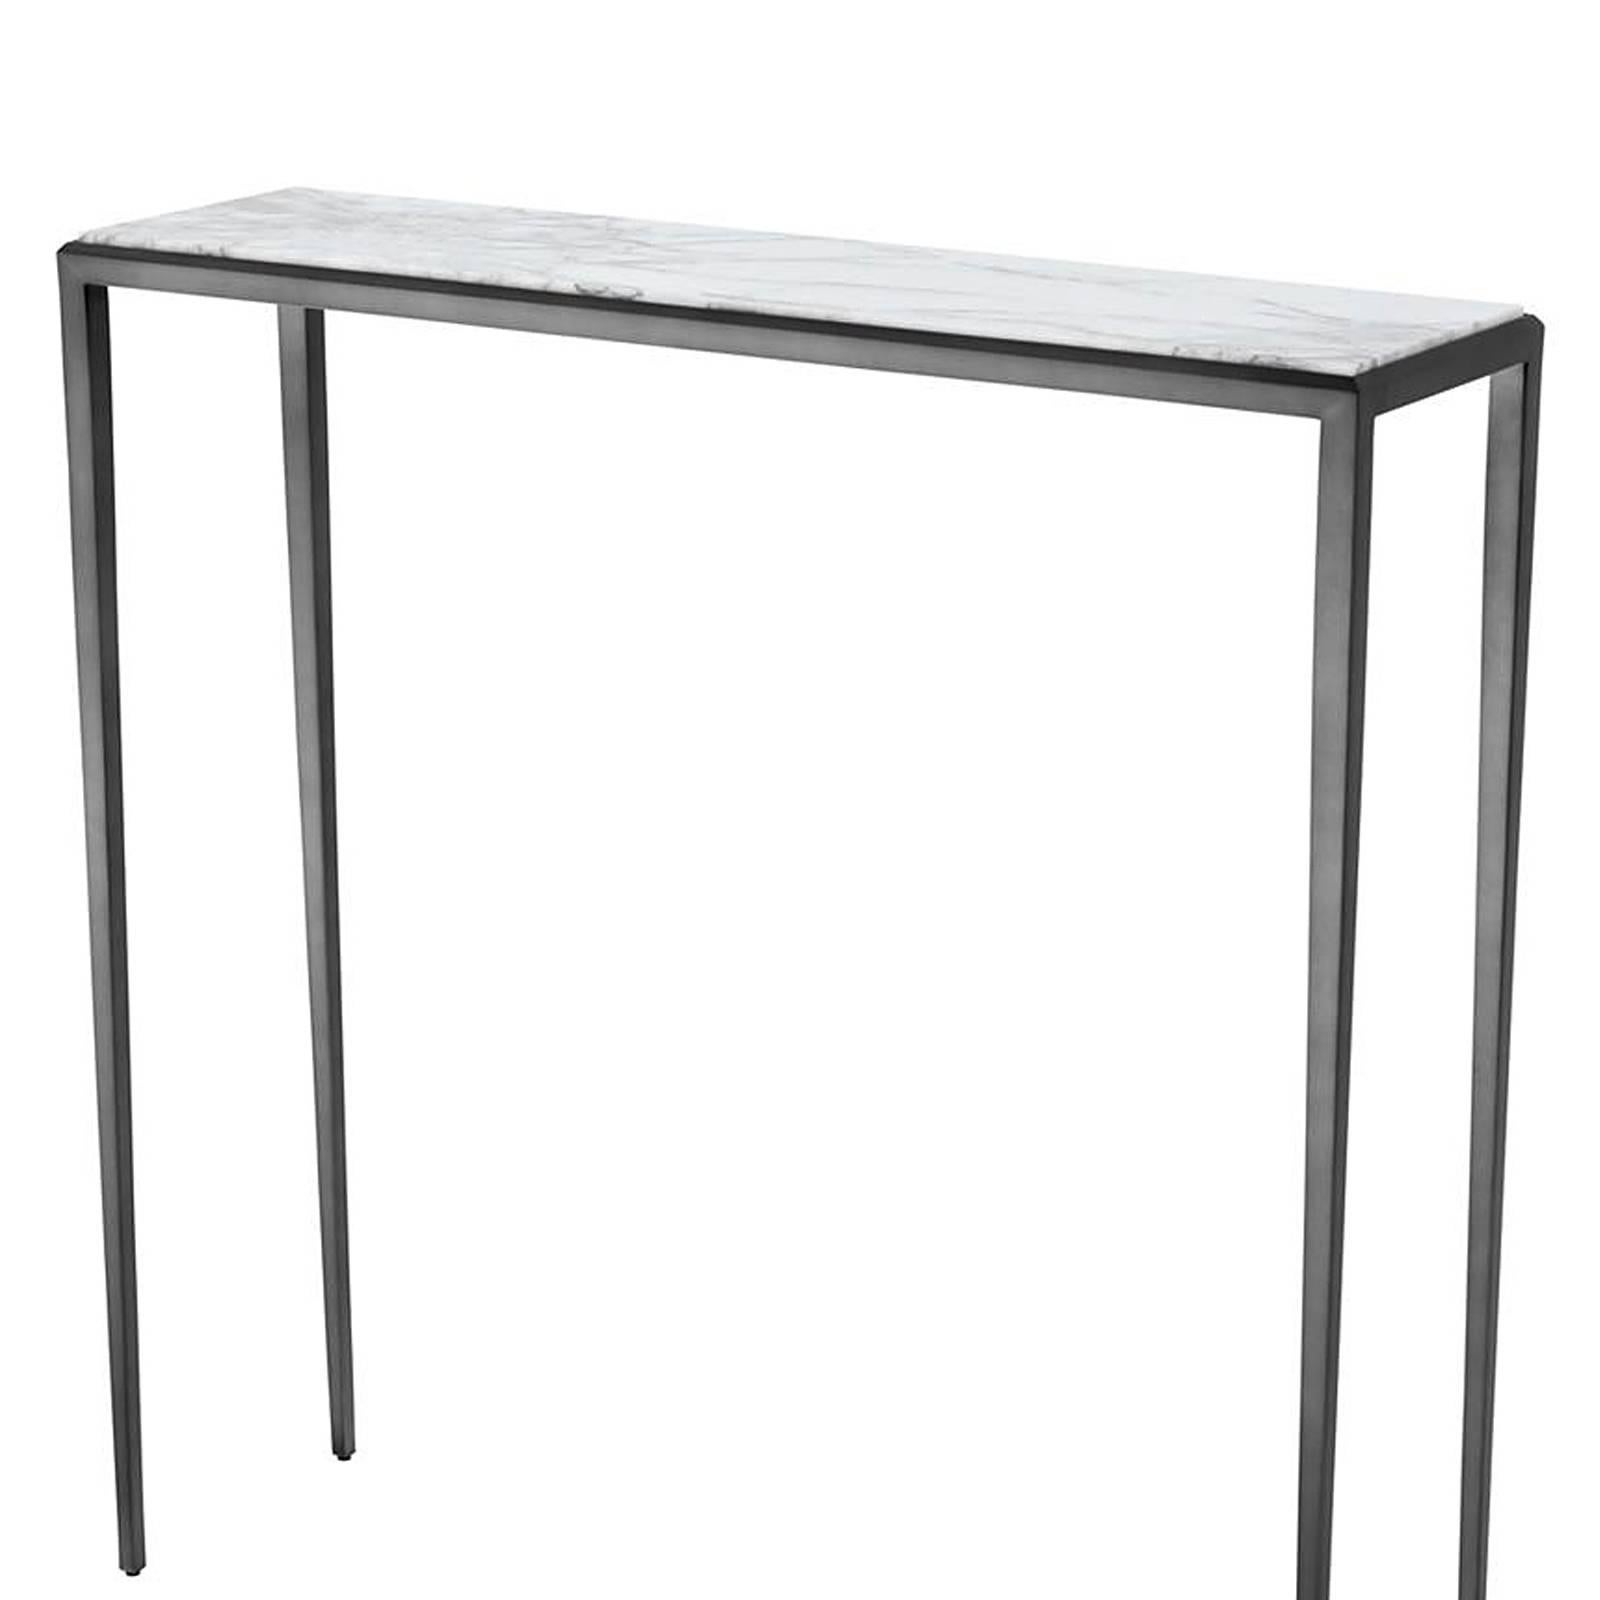 Console Table Leggy with structure in solid 
bronze finish. With white Lilac marble top.
Also available with brown marble top.
Also available in gold finish structure with 
white Lilac marble top.
Also available in Coffee Table Leggy or
Side Table